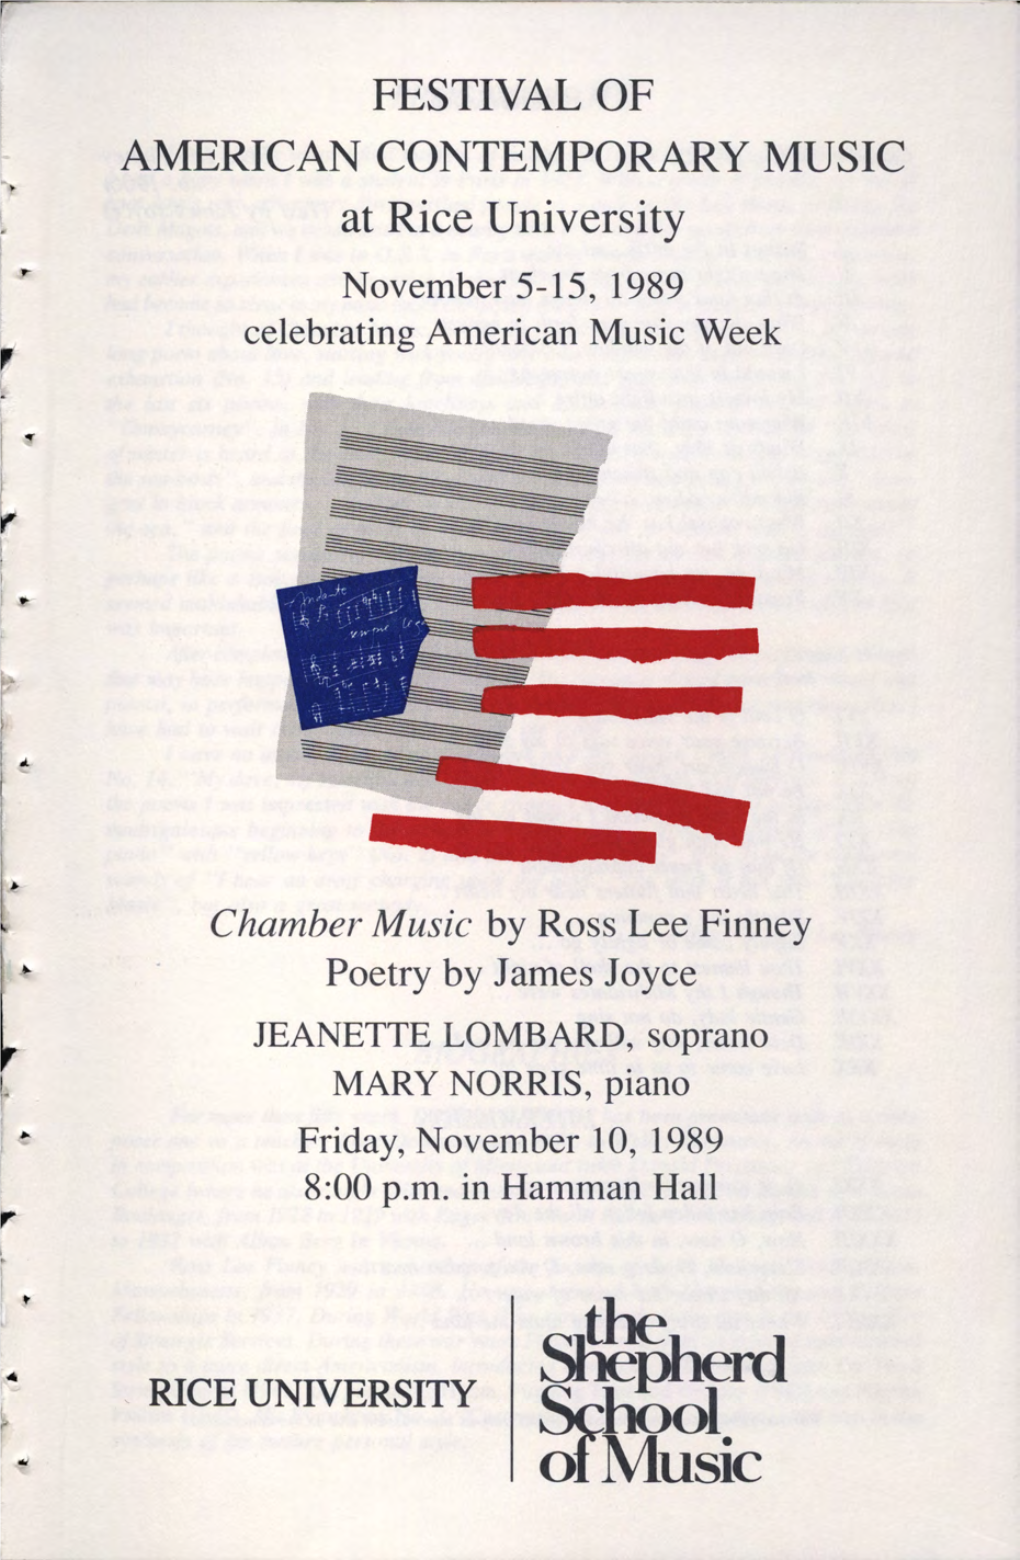 Chamber Music by Ross Lee Finney Poetry by James Joyce JEANETTE LOMBARD, Soprano MARY NORRIS, Piano Friday, November 10, 1989 L 8:00 P.M